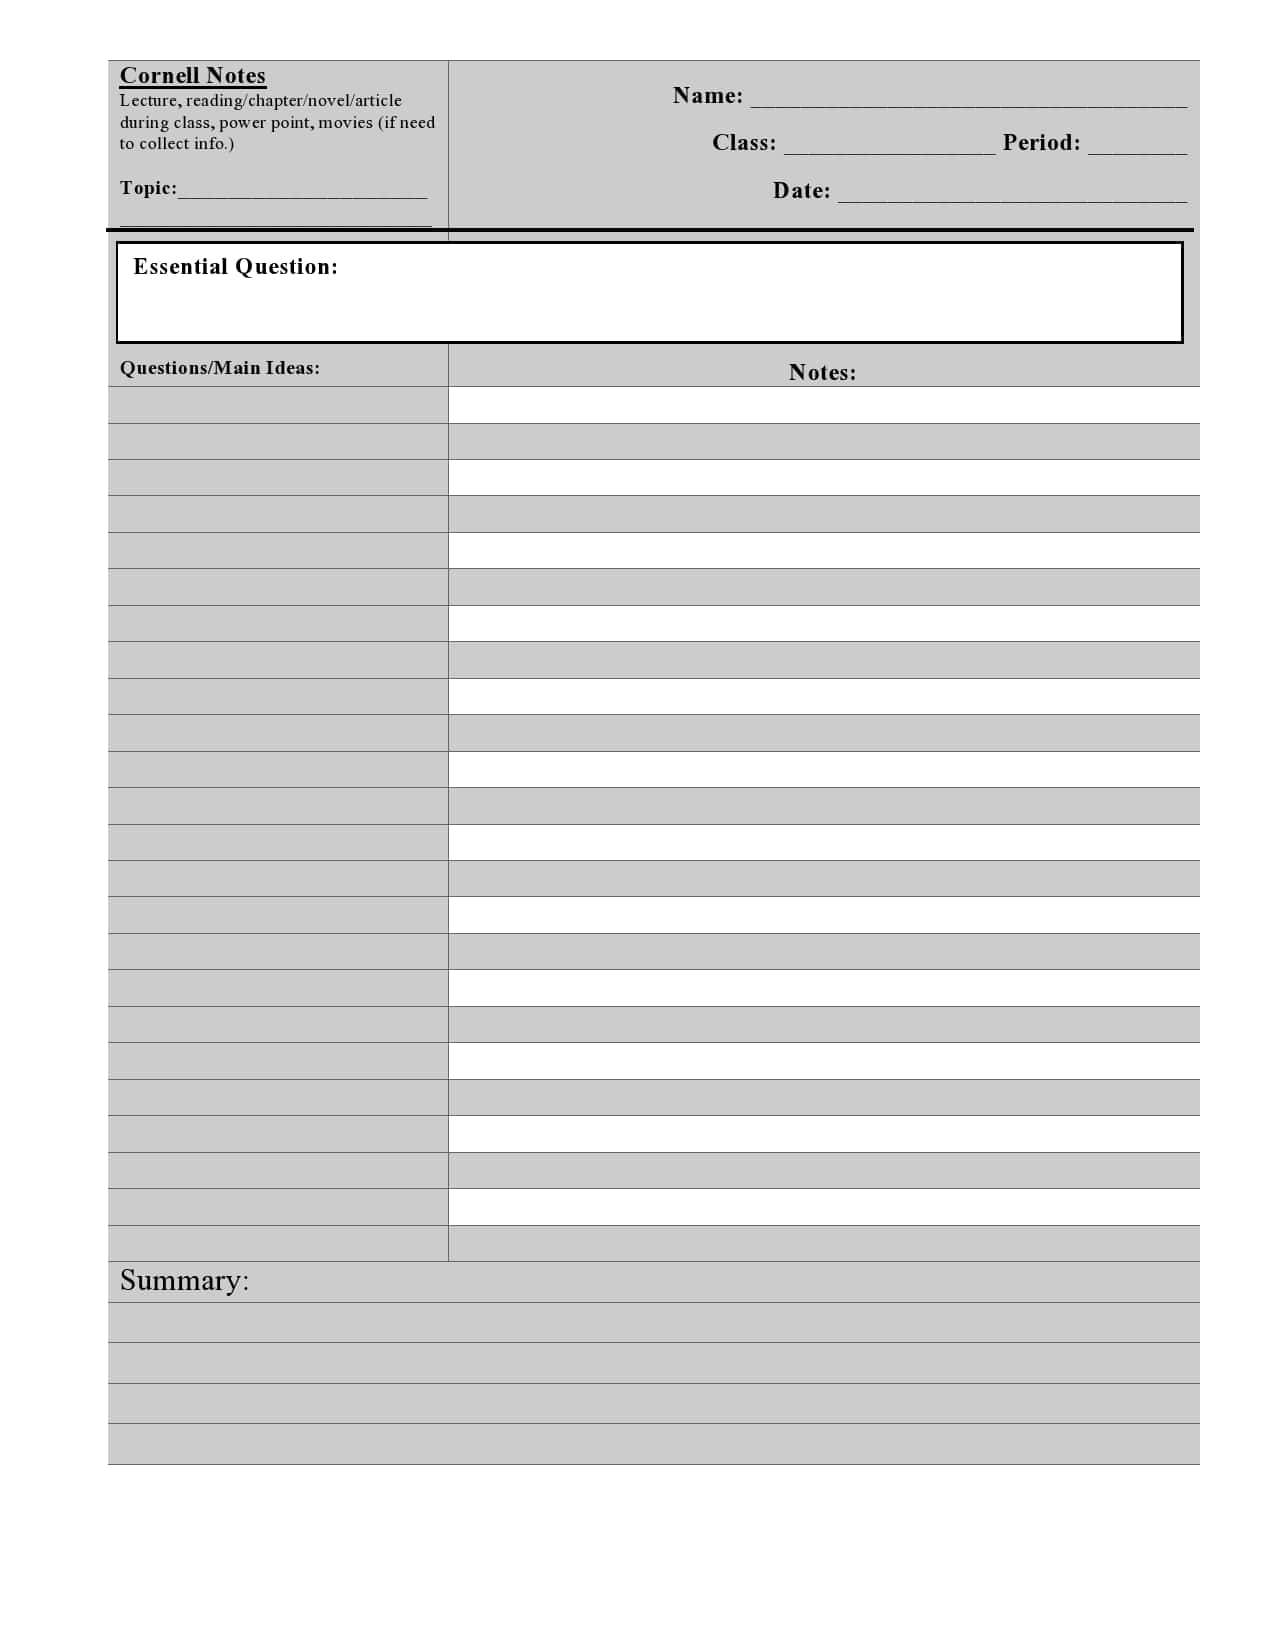 22 Printable Cornell Notes Templates [Free] - TemplateArchive Throughout Word Note Taking Template